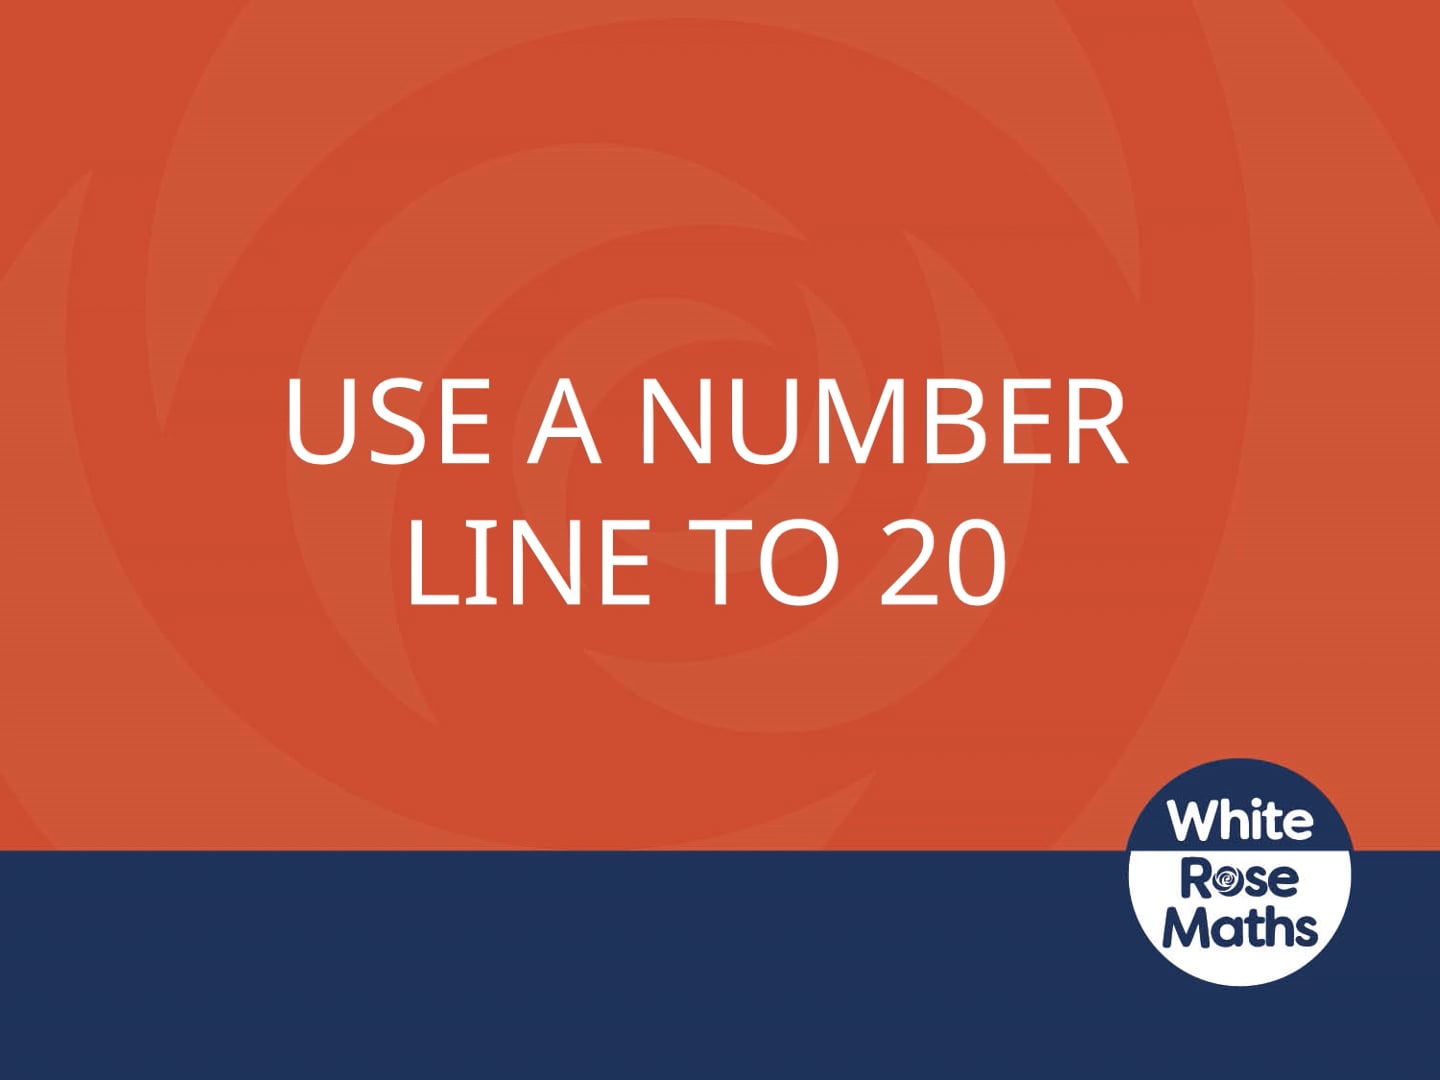 y1-spring-block-1-ts9-use-a-number-line-to-20-on-vimeo